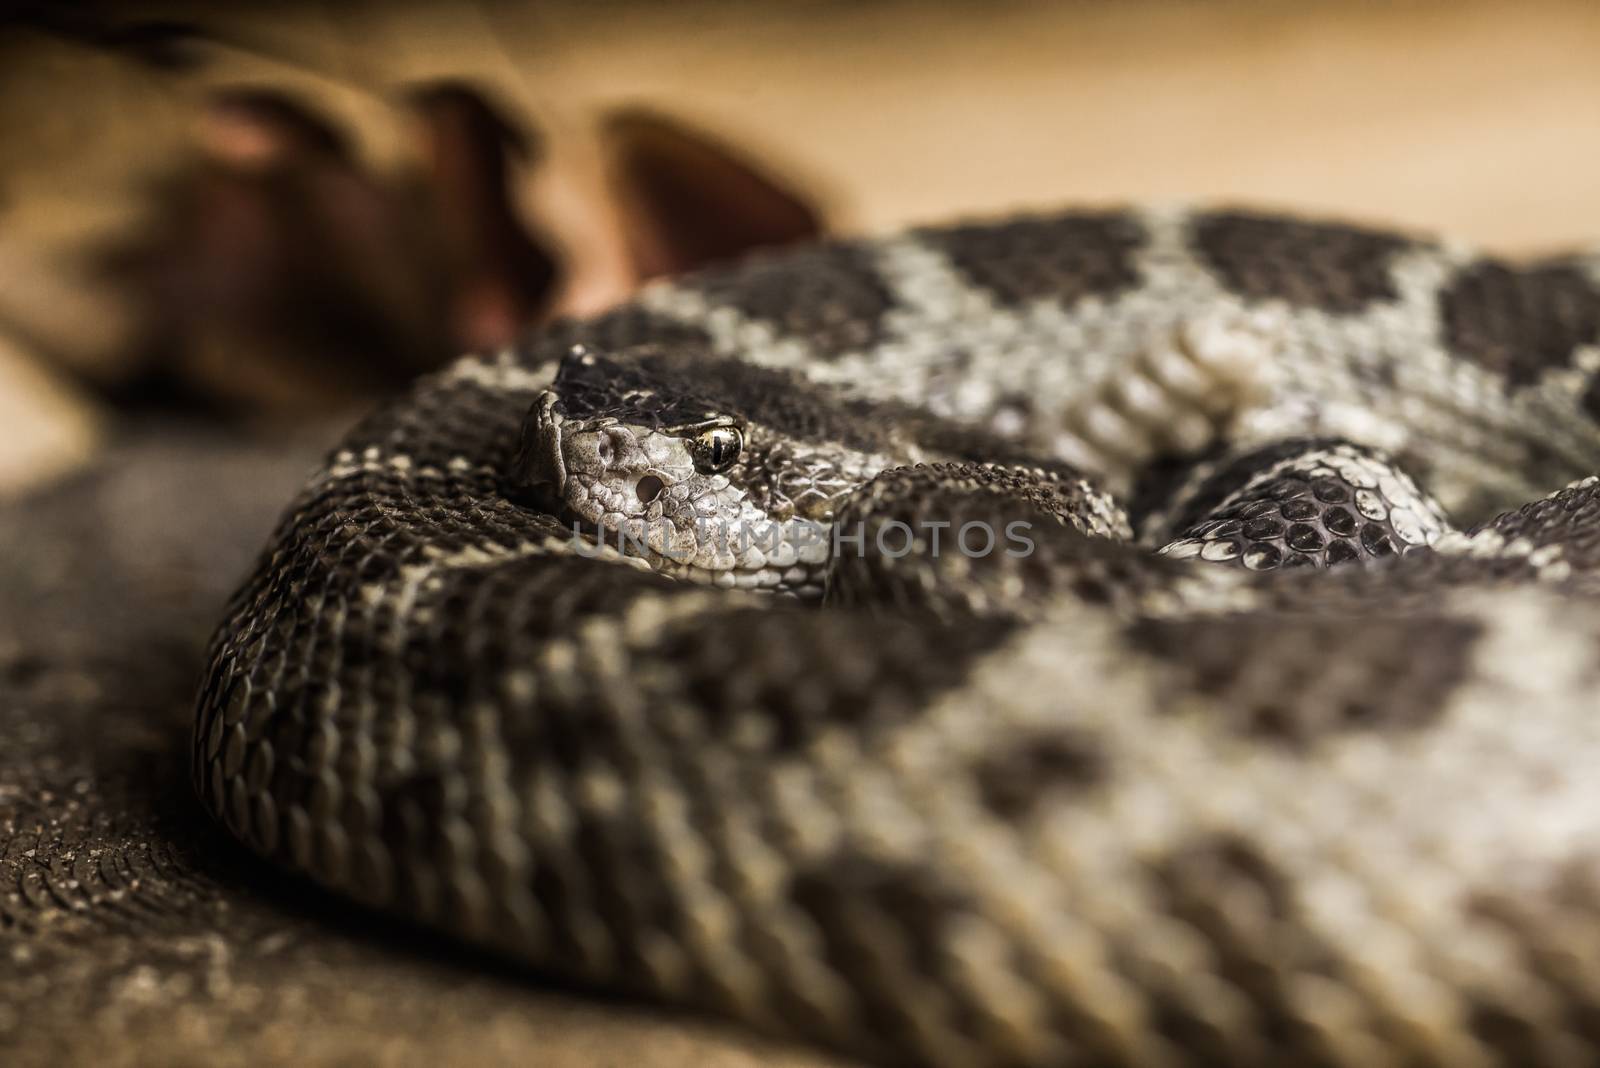 Close up of a Northern Pacific Rattlesnake, with selective focus on the head